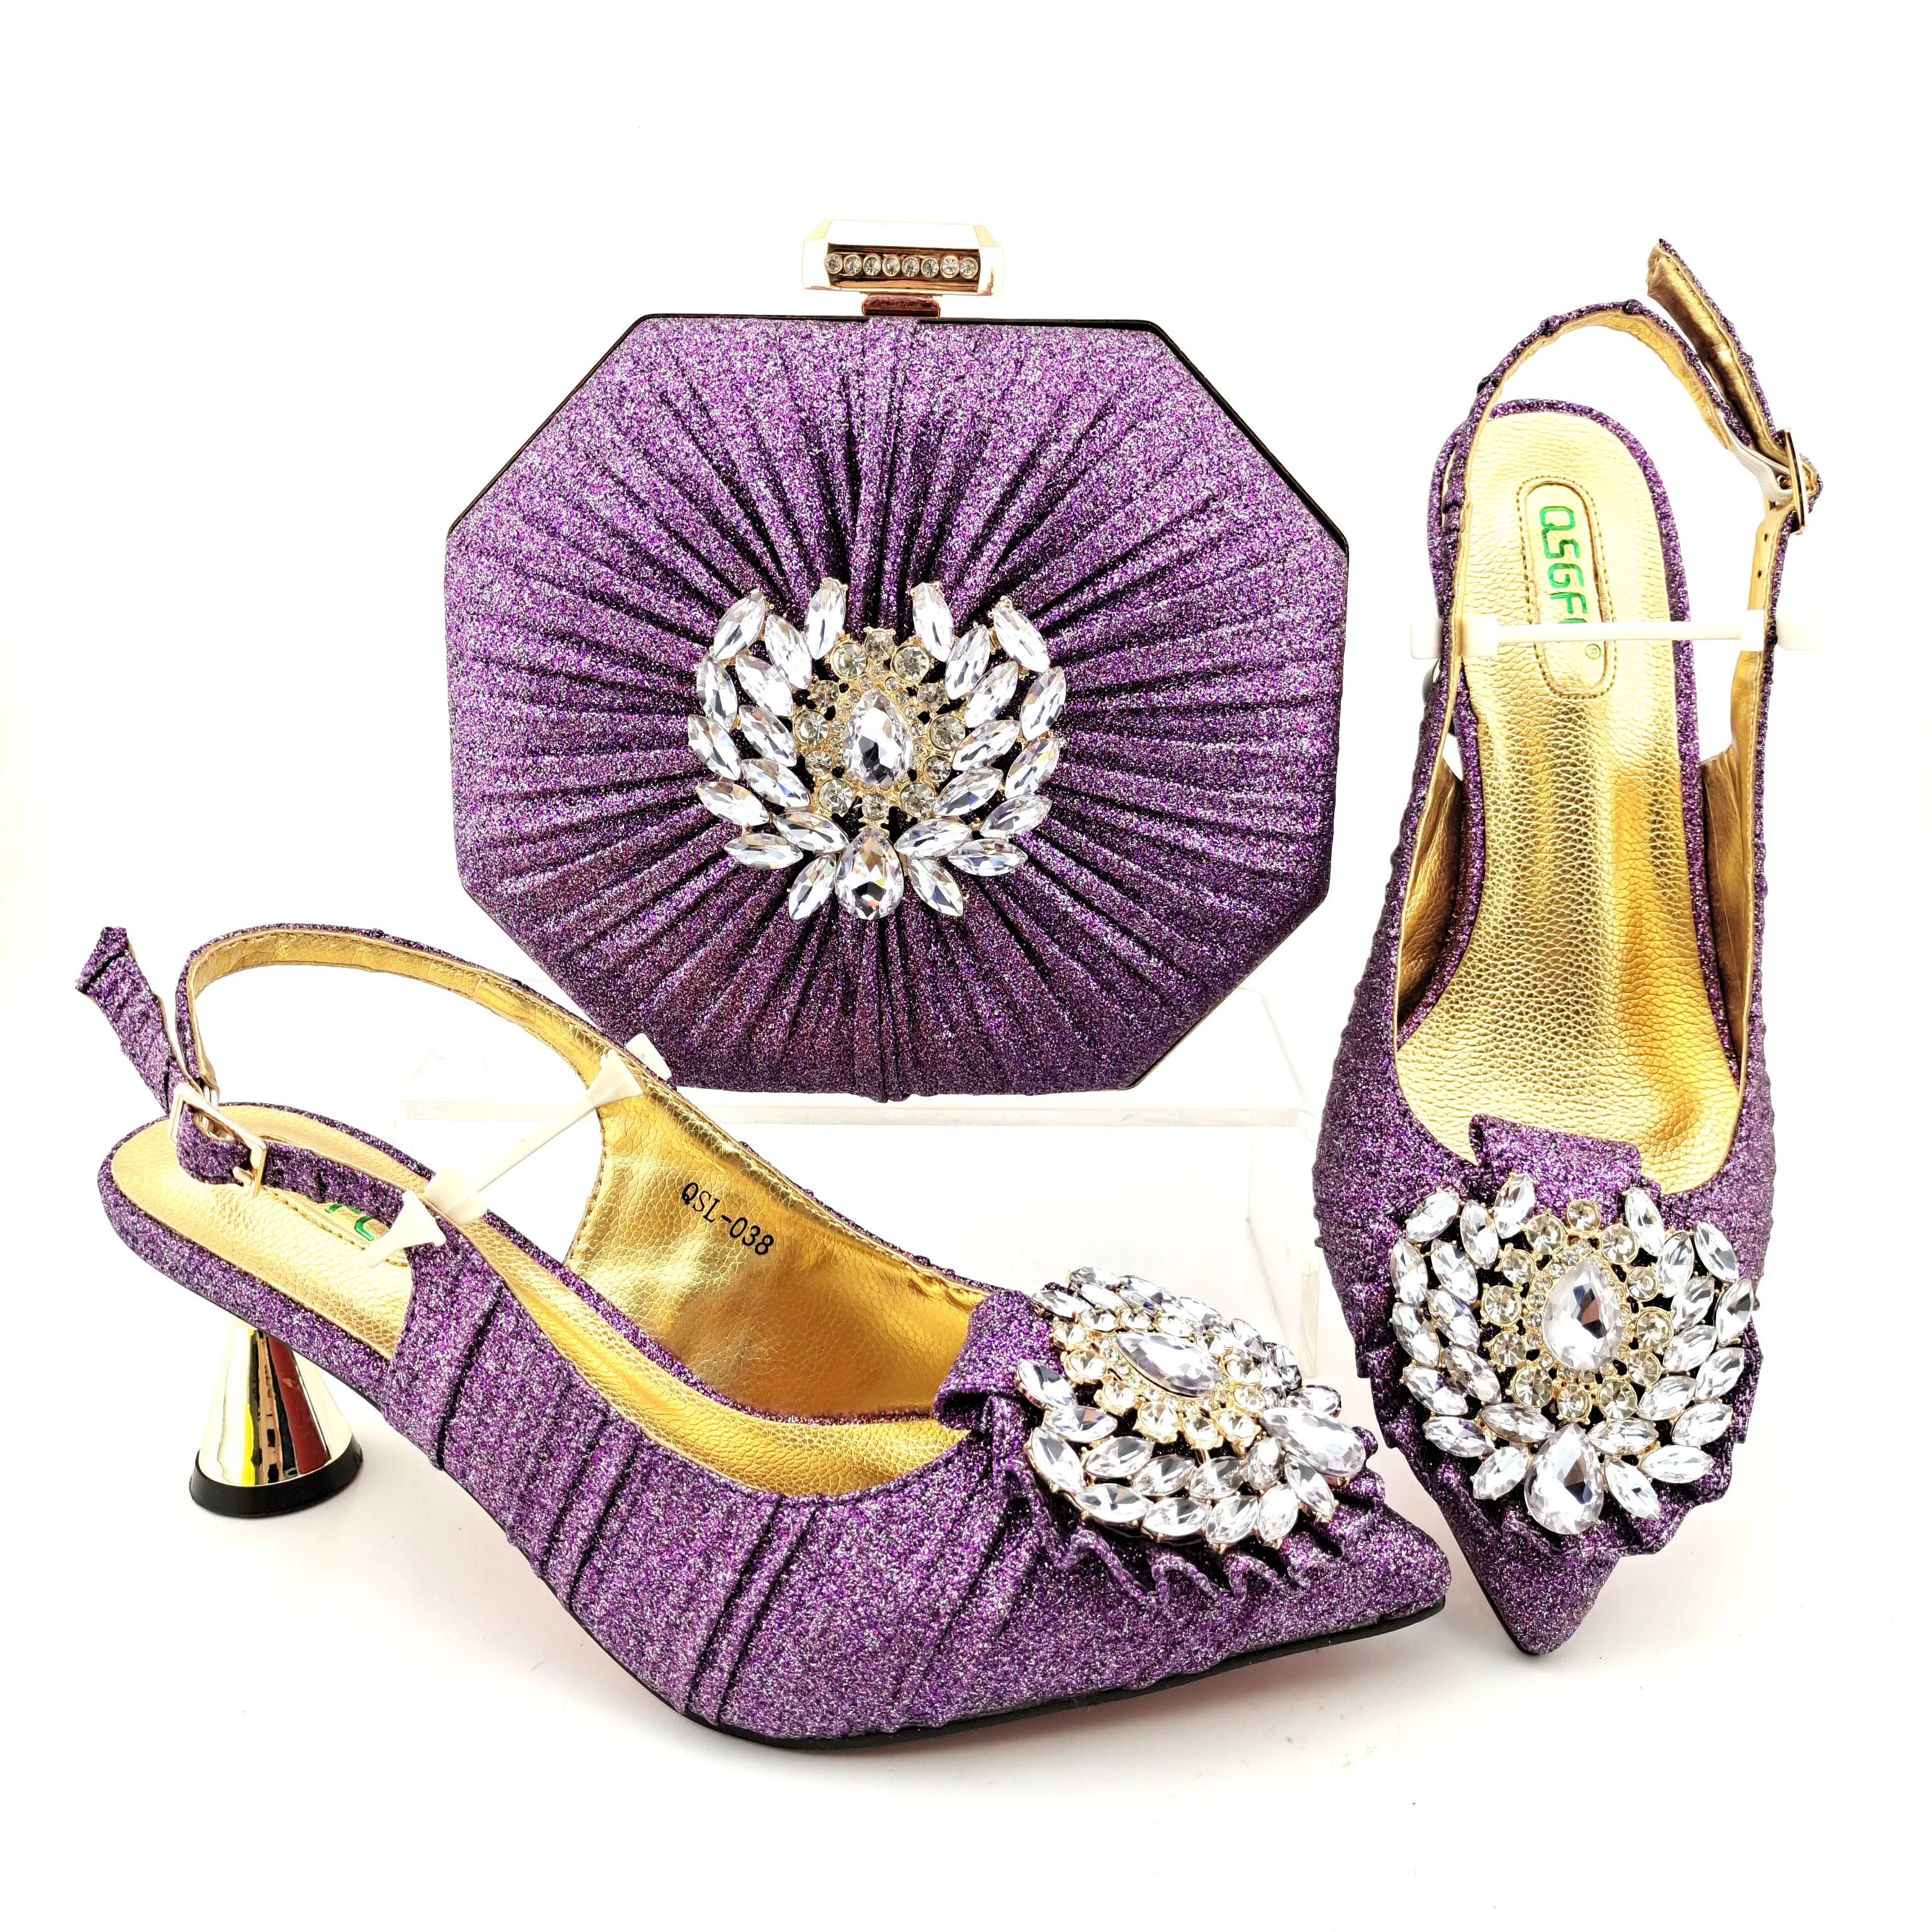 

Hot Selling Italian Design 2021 Newest Fashion and Elegant Purple Color Crystal Style Noble Women Shoes and Bag Set for Party